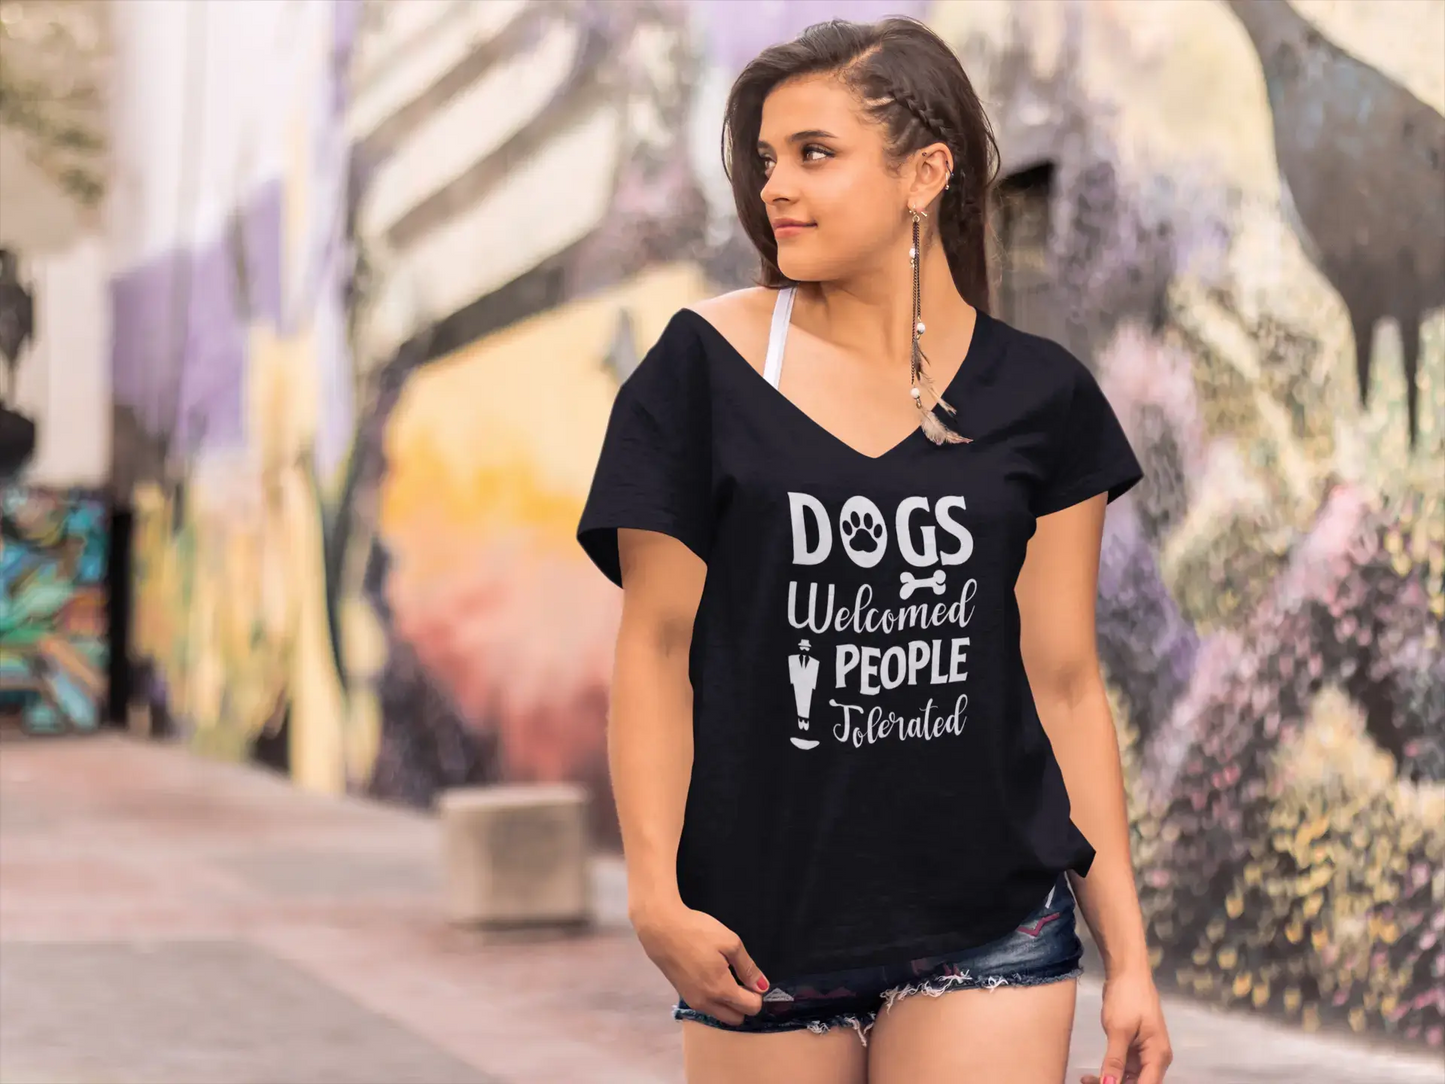 ULTRABASIC Women's T-Shirt Dogs Welcomed People Tolerated - Funny Short Sleeve Tee Shirt Tops